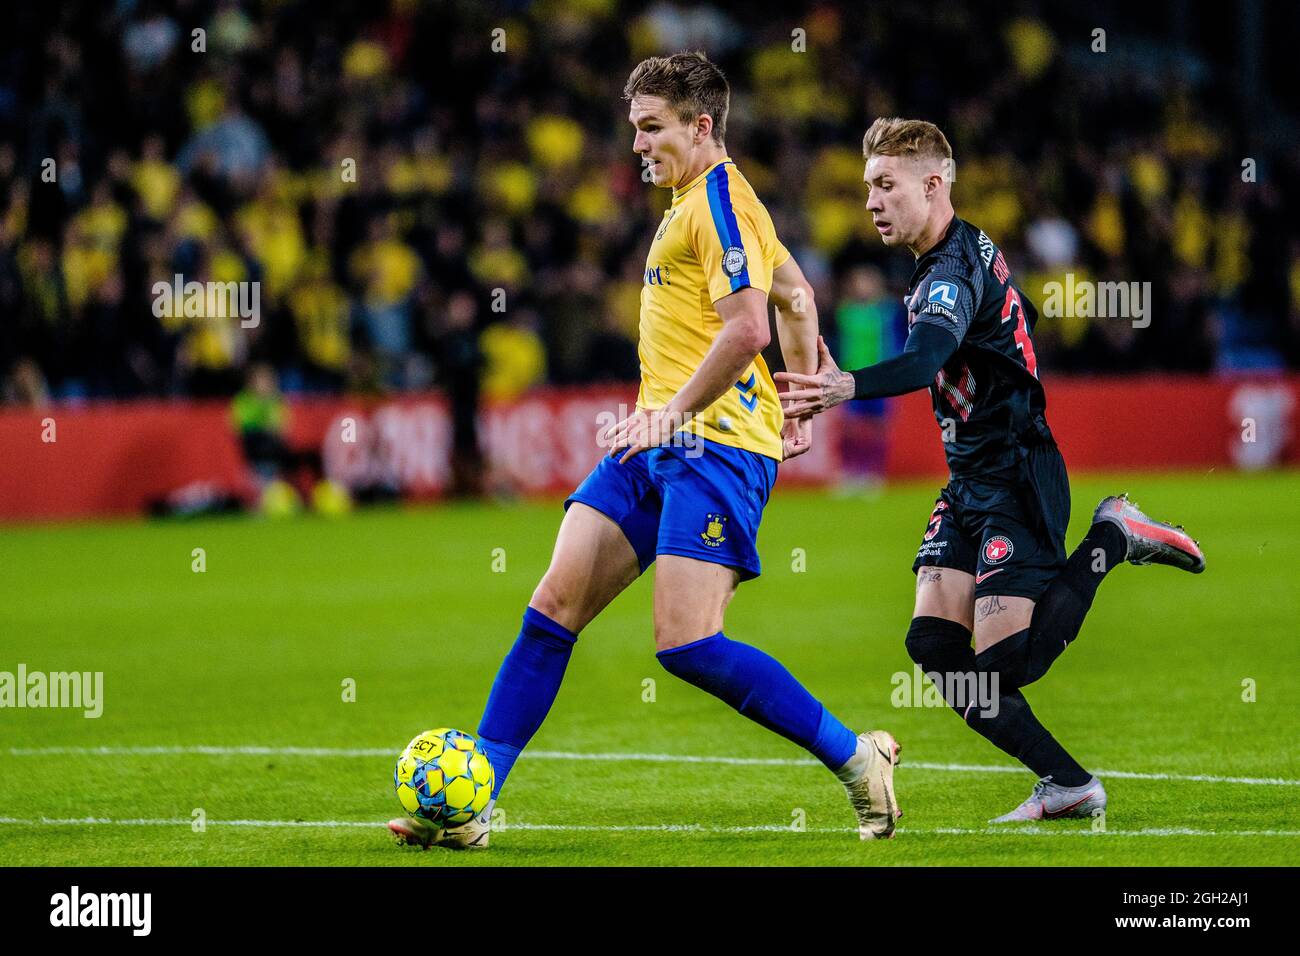 Brondby, Denmark. 29th, August 2021. Mikael Uhre (11) of Broendby IF and Charles  (35) of FC Midtjylland seen during the 3F Superliga match between Broendby IF and FC Midtjylland at Brondby Stadion. (Photo credit: Gonzales Photo - Robert Hendel). Stock Photo